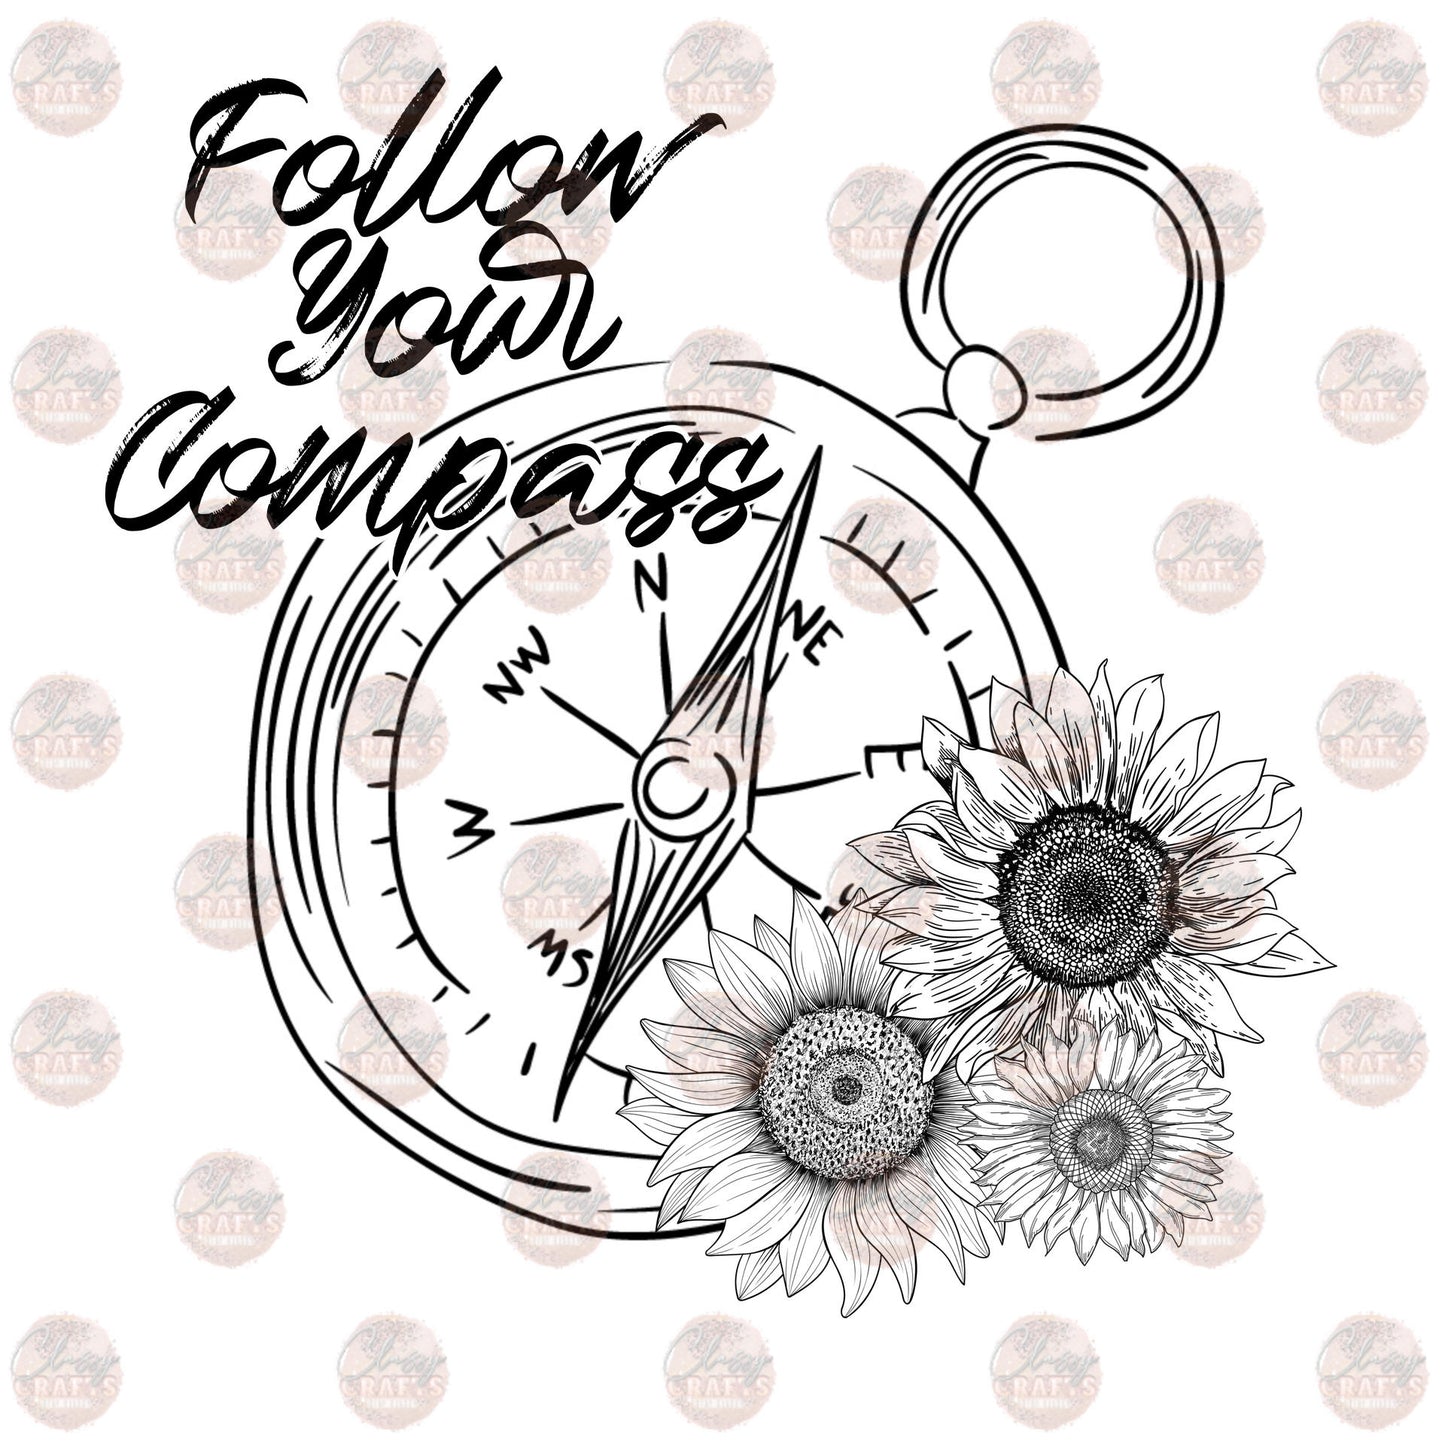 Follow Your Compass- Sublimation Transfer